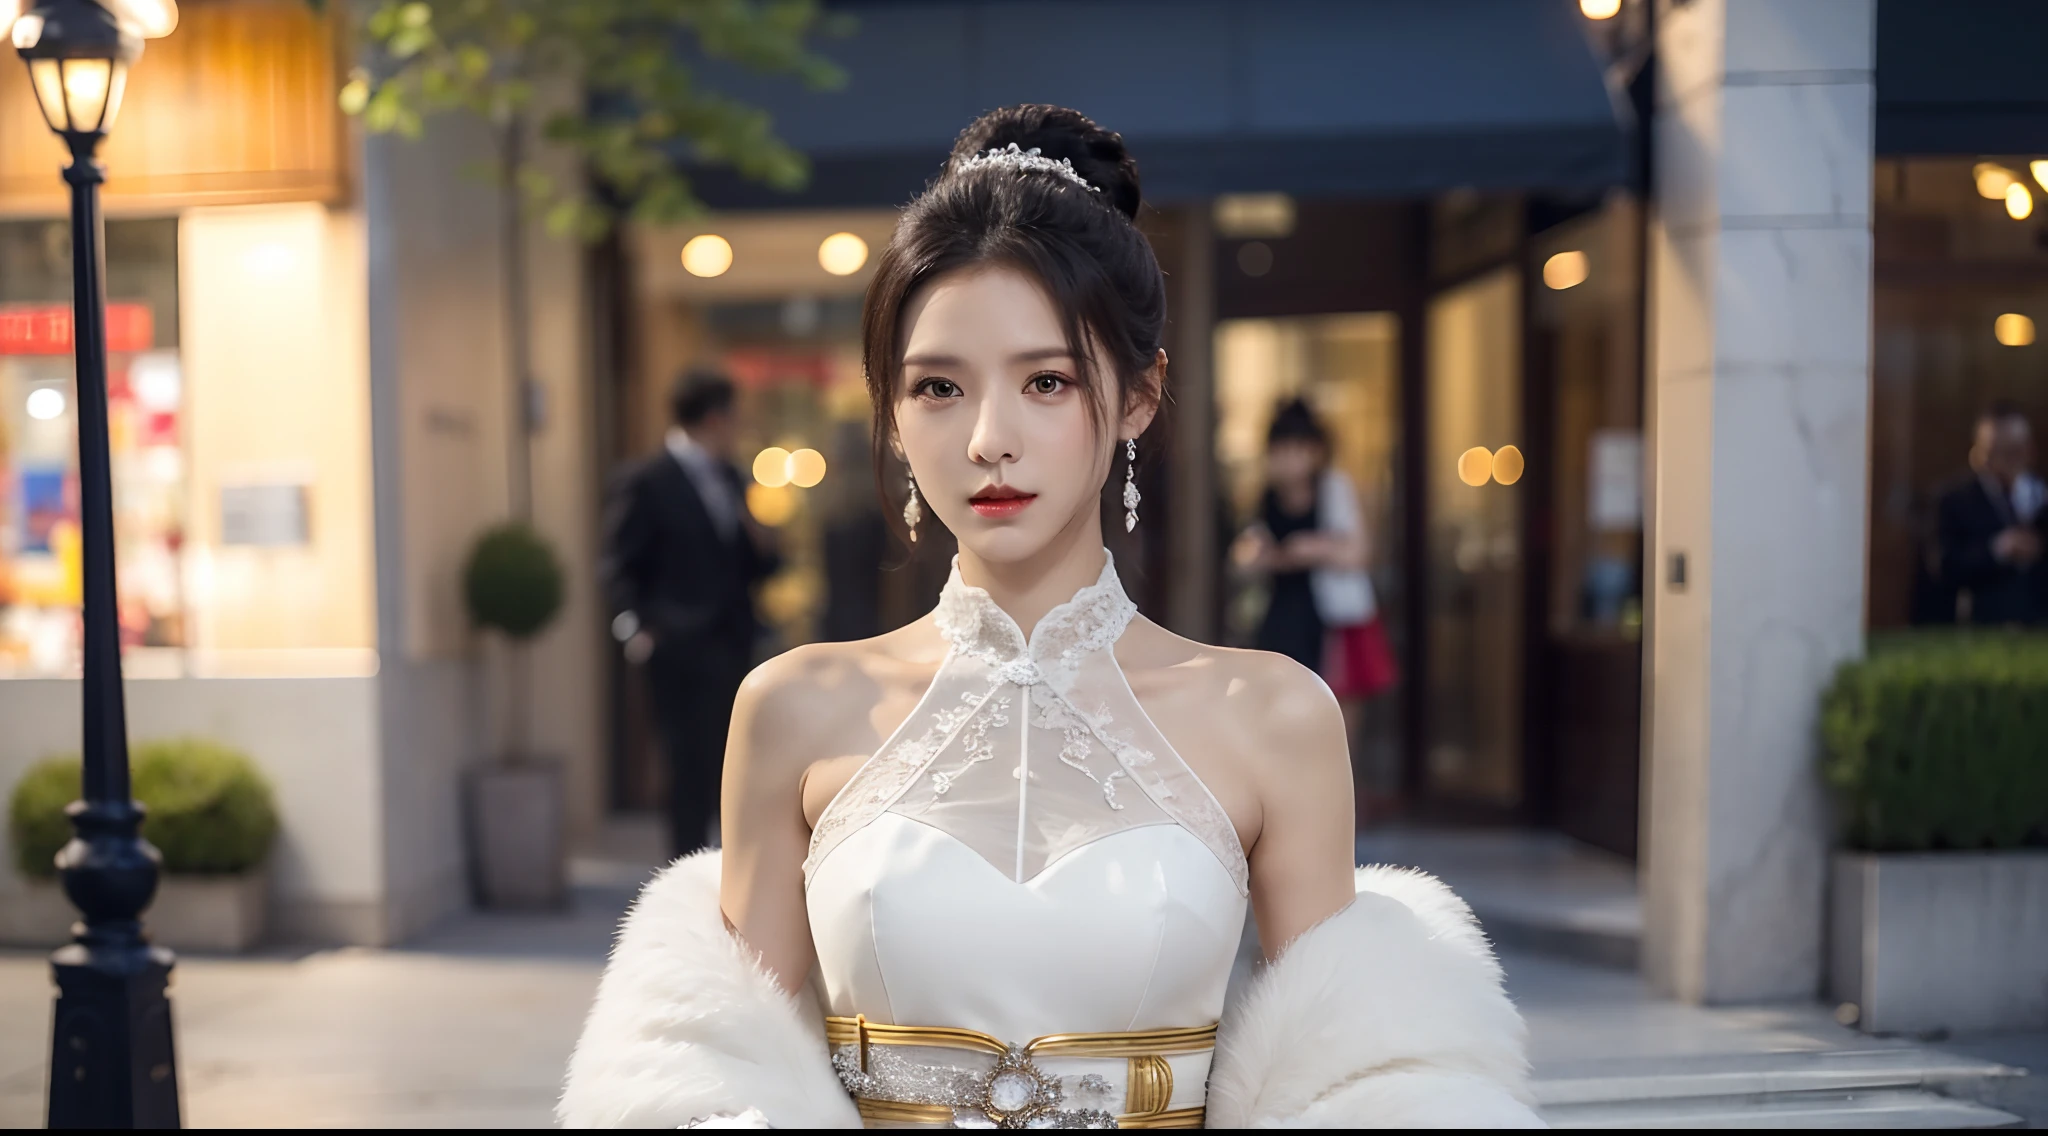 Realiy，8K，Ultra-high resolution，Front light，rays of sunshine，Background bokeh，depth of fields，photographed，the city street，There is water on the ground，Sports cars， Female celebrities，long whitr hair，cropped shoulders，shift dresses，formal outfit， Hair_decorations, (独奏,solo person), Lace long gloves，jewelry，sash, Looking_at_peeping at the viewer, Bigchest，(The scene is，A half body:1.2)，Face lighting